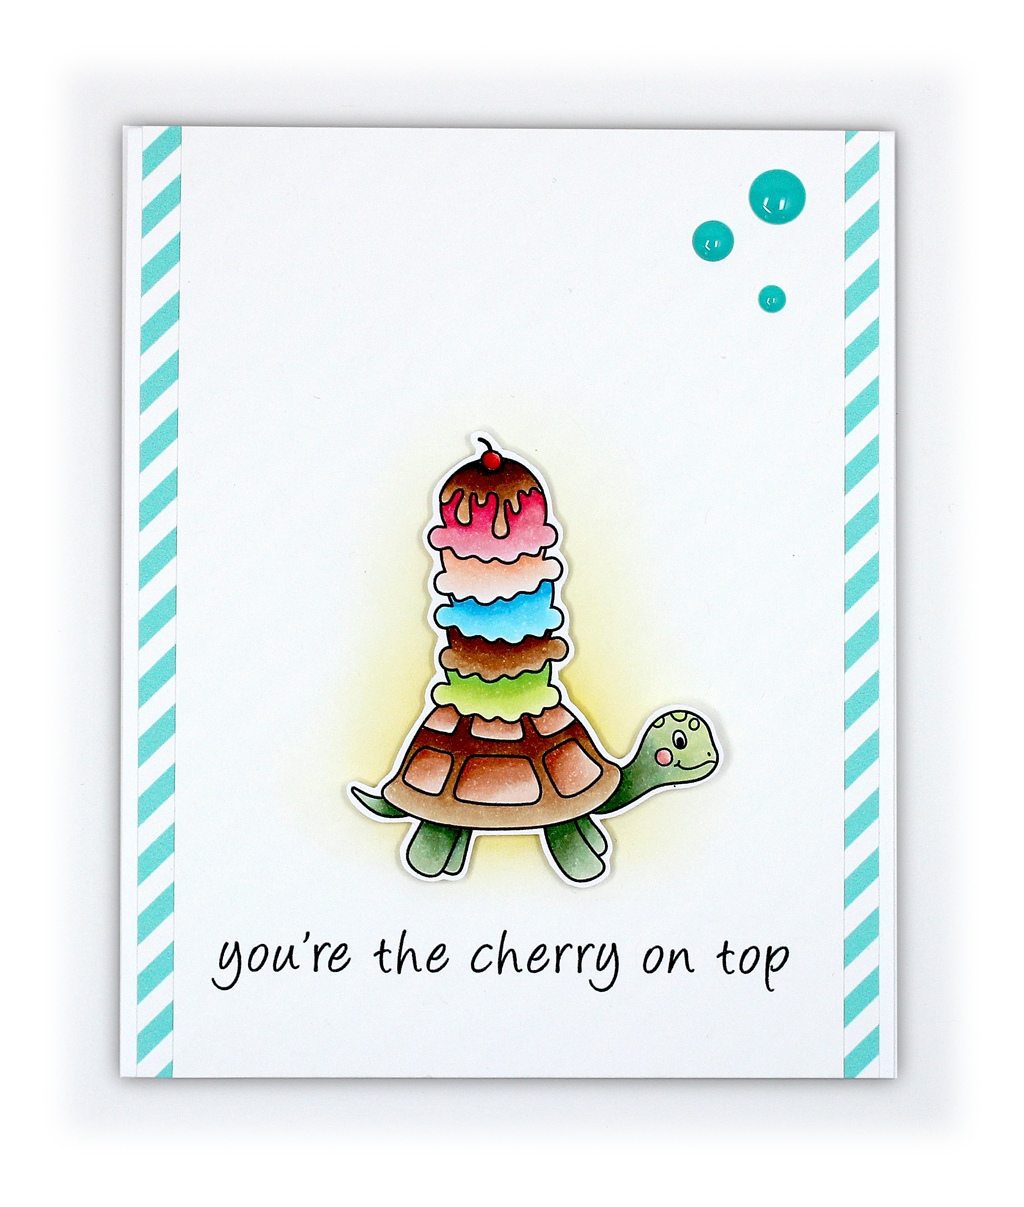 Homemade card using the stamp set and die, "Turtley Awesome" from Dare 2B Artzy. Image of a turtle with scoops of ice cream on it's back and the sentiment, "You're the cherry on top".